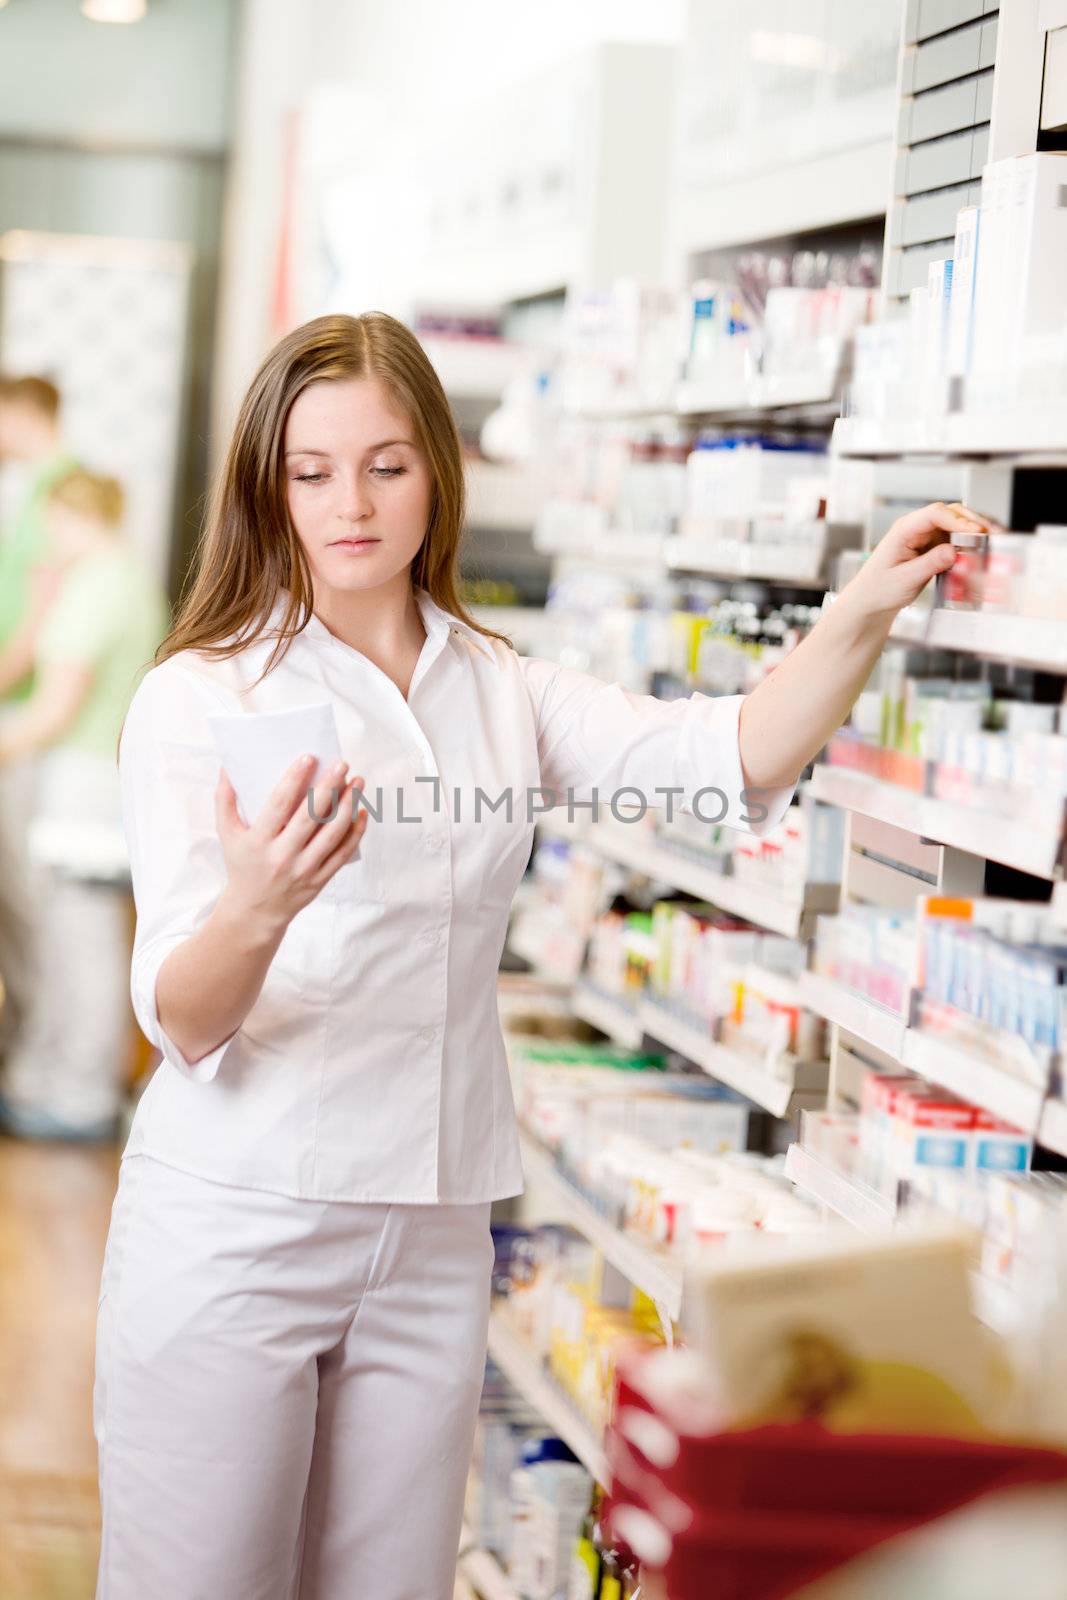 Pharmacist Looking at Prescription by leaf